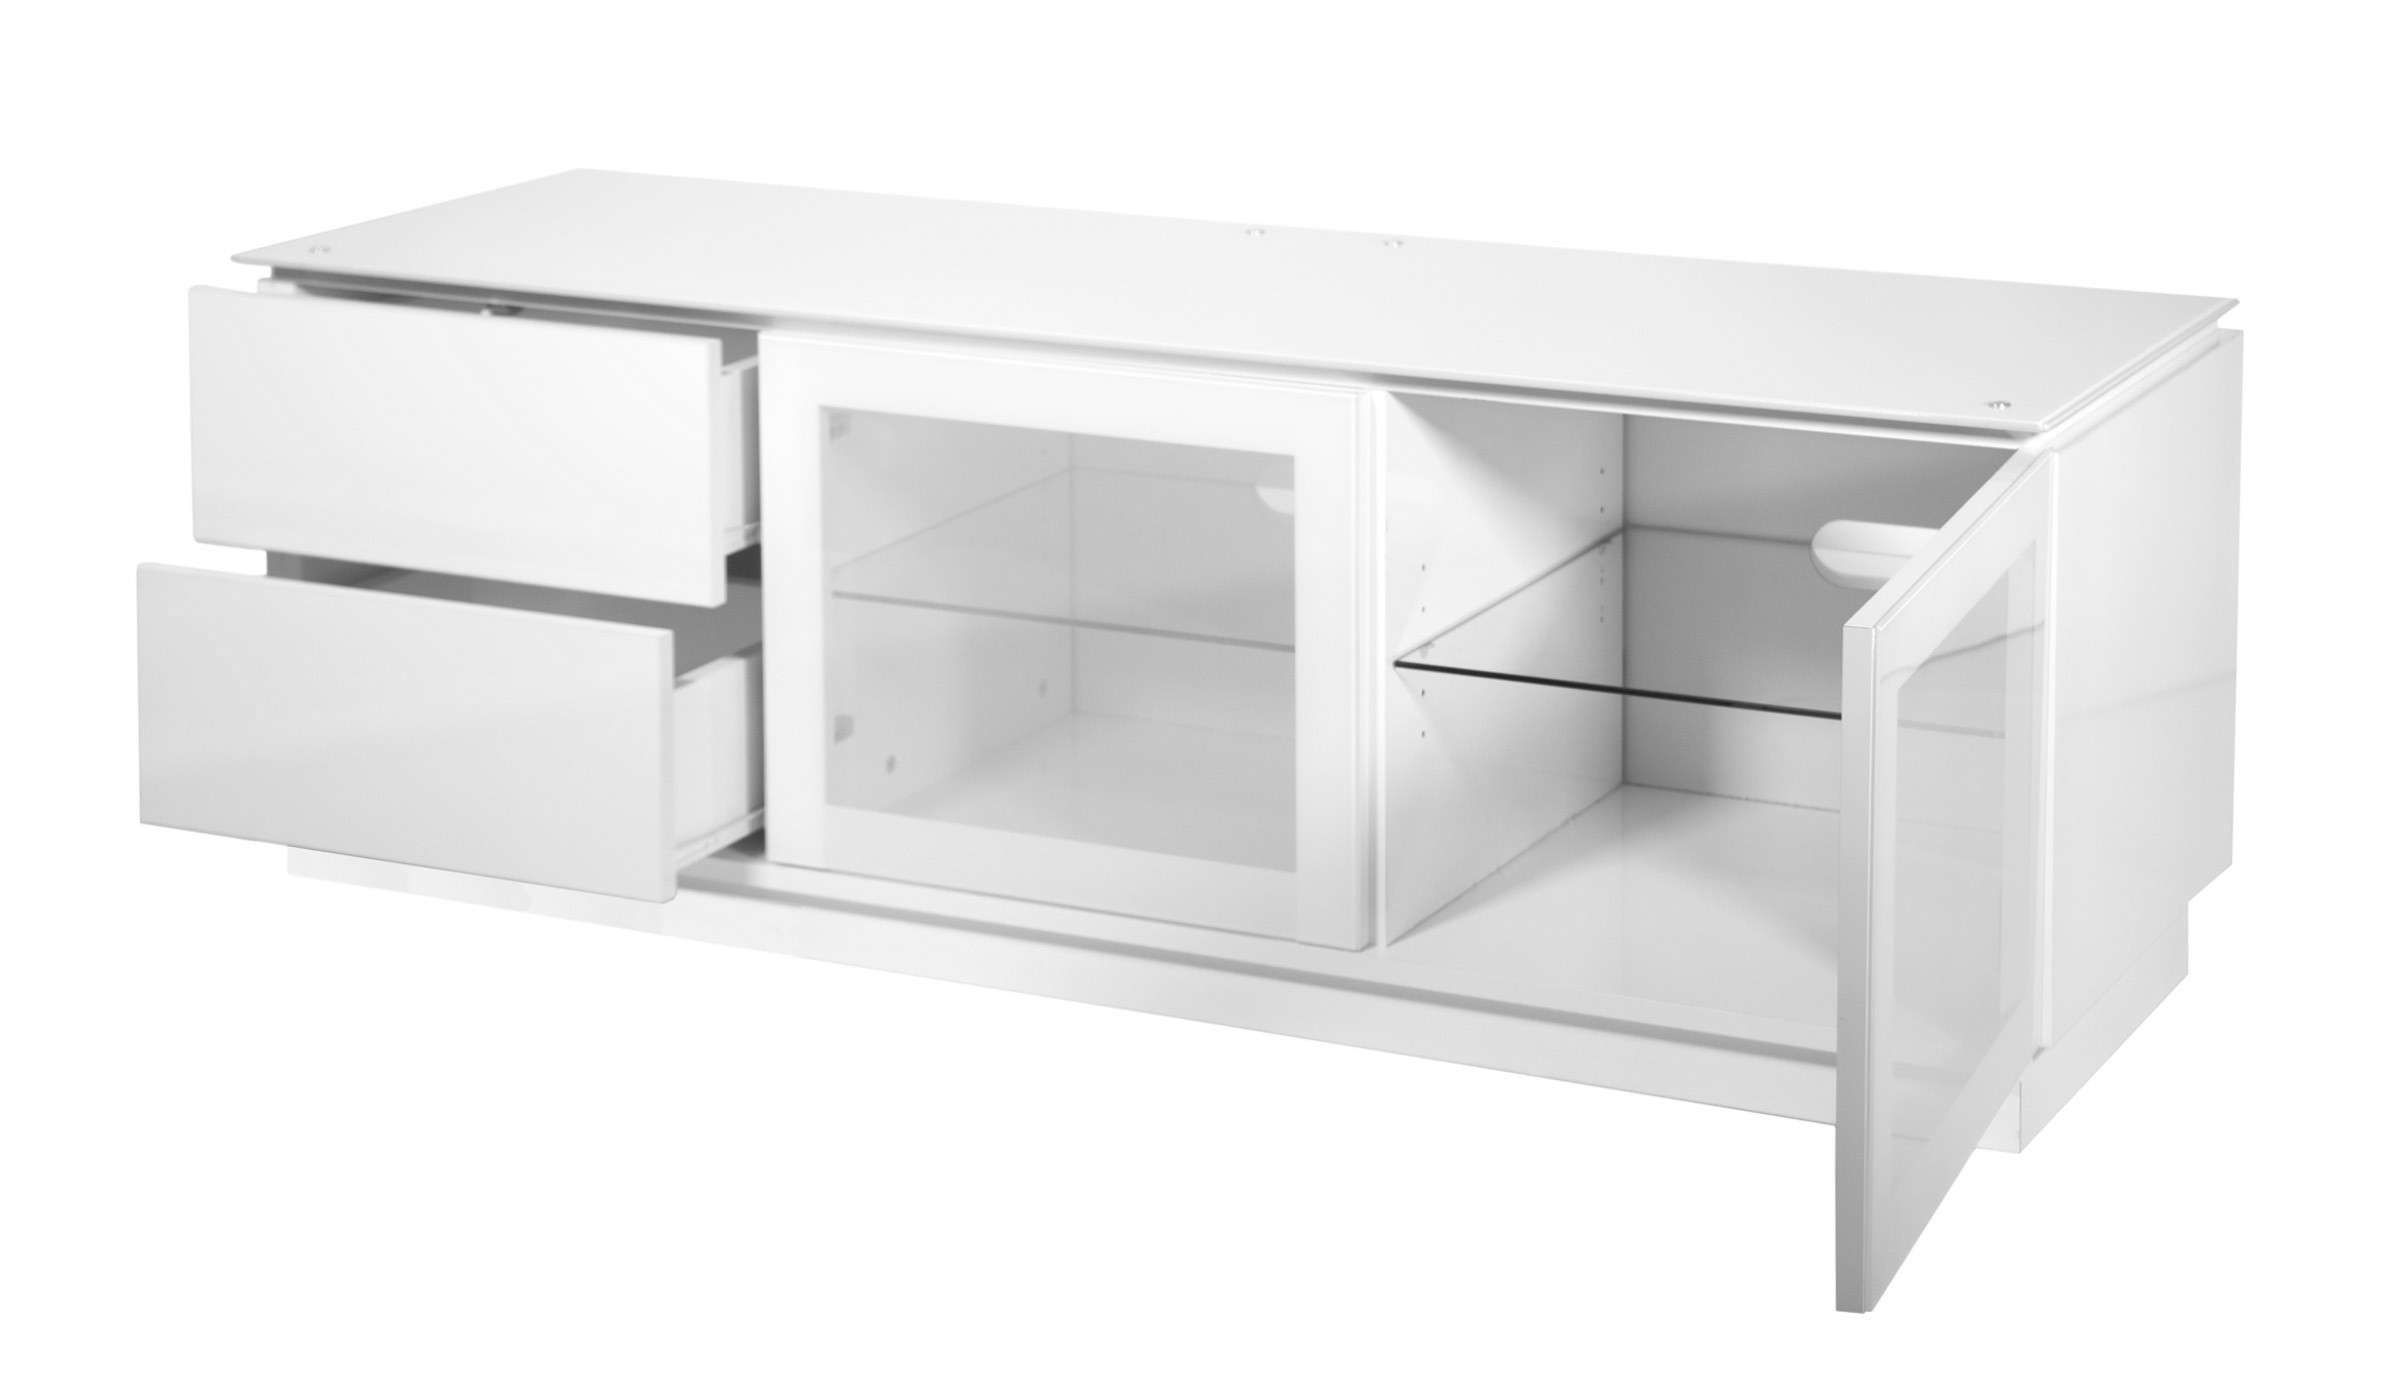 White Gloss Tv Cabinet Up To 55" Tv | Casino Mmt C1350w Pertaining To Gloss White Tv Cabinets (View 15 of 20)